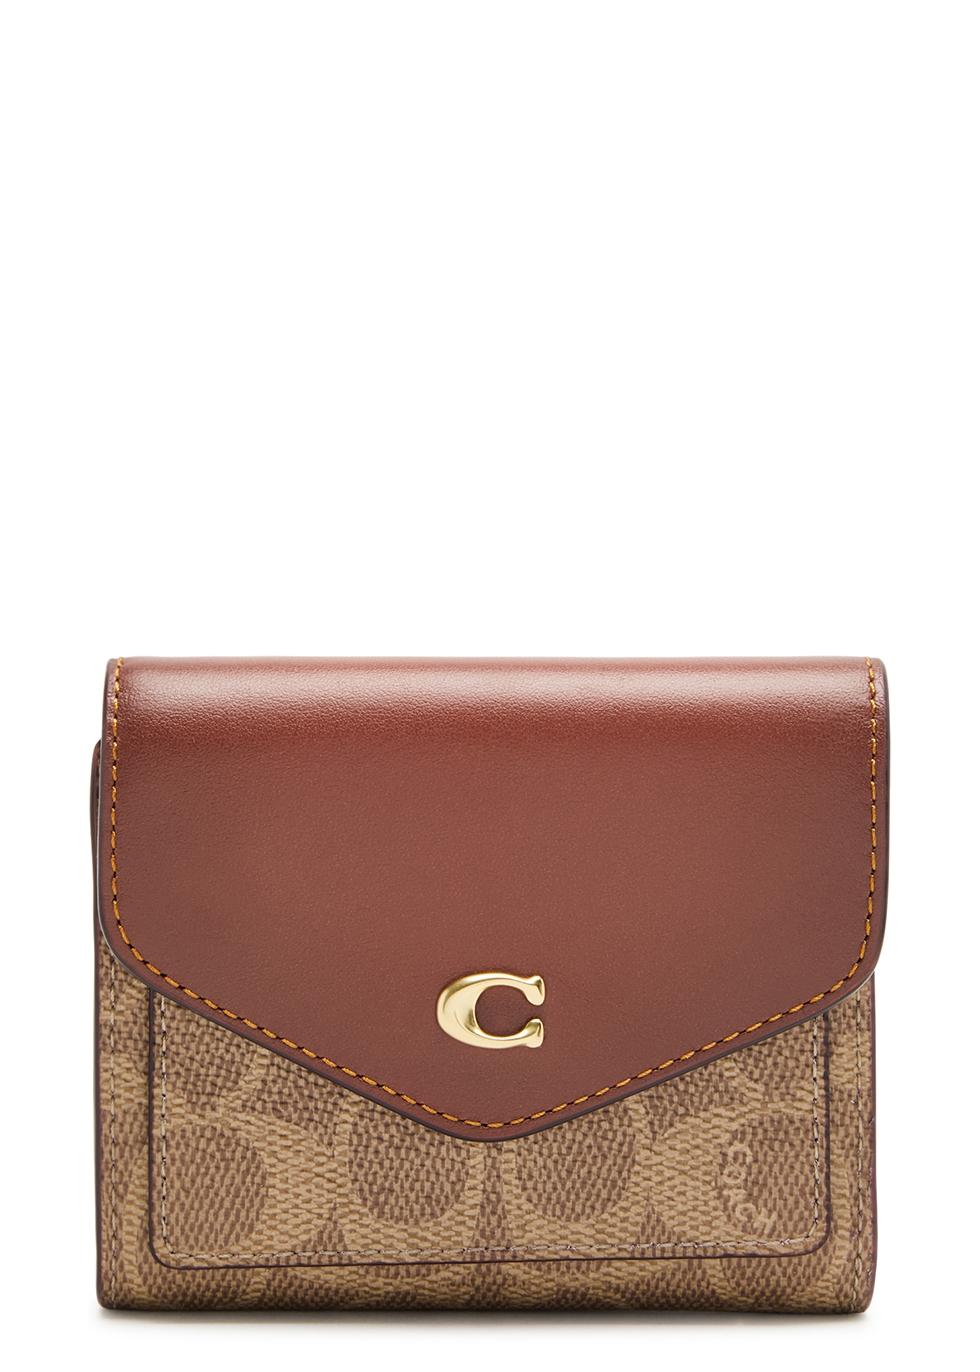 COACH Wyn Small Coated Canvas Wallet in Brown | Lyst UK